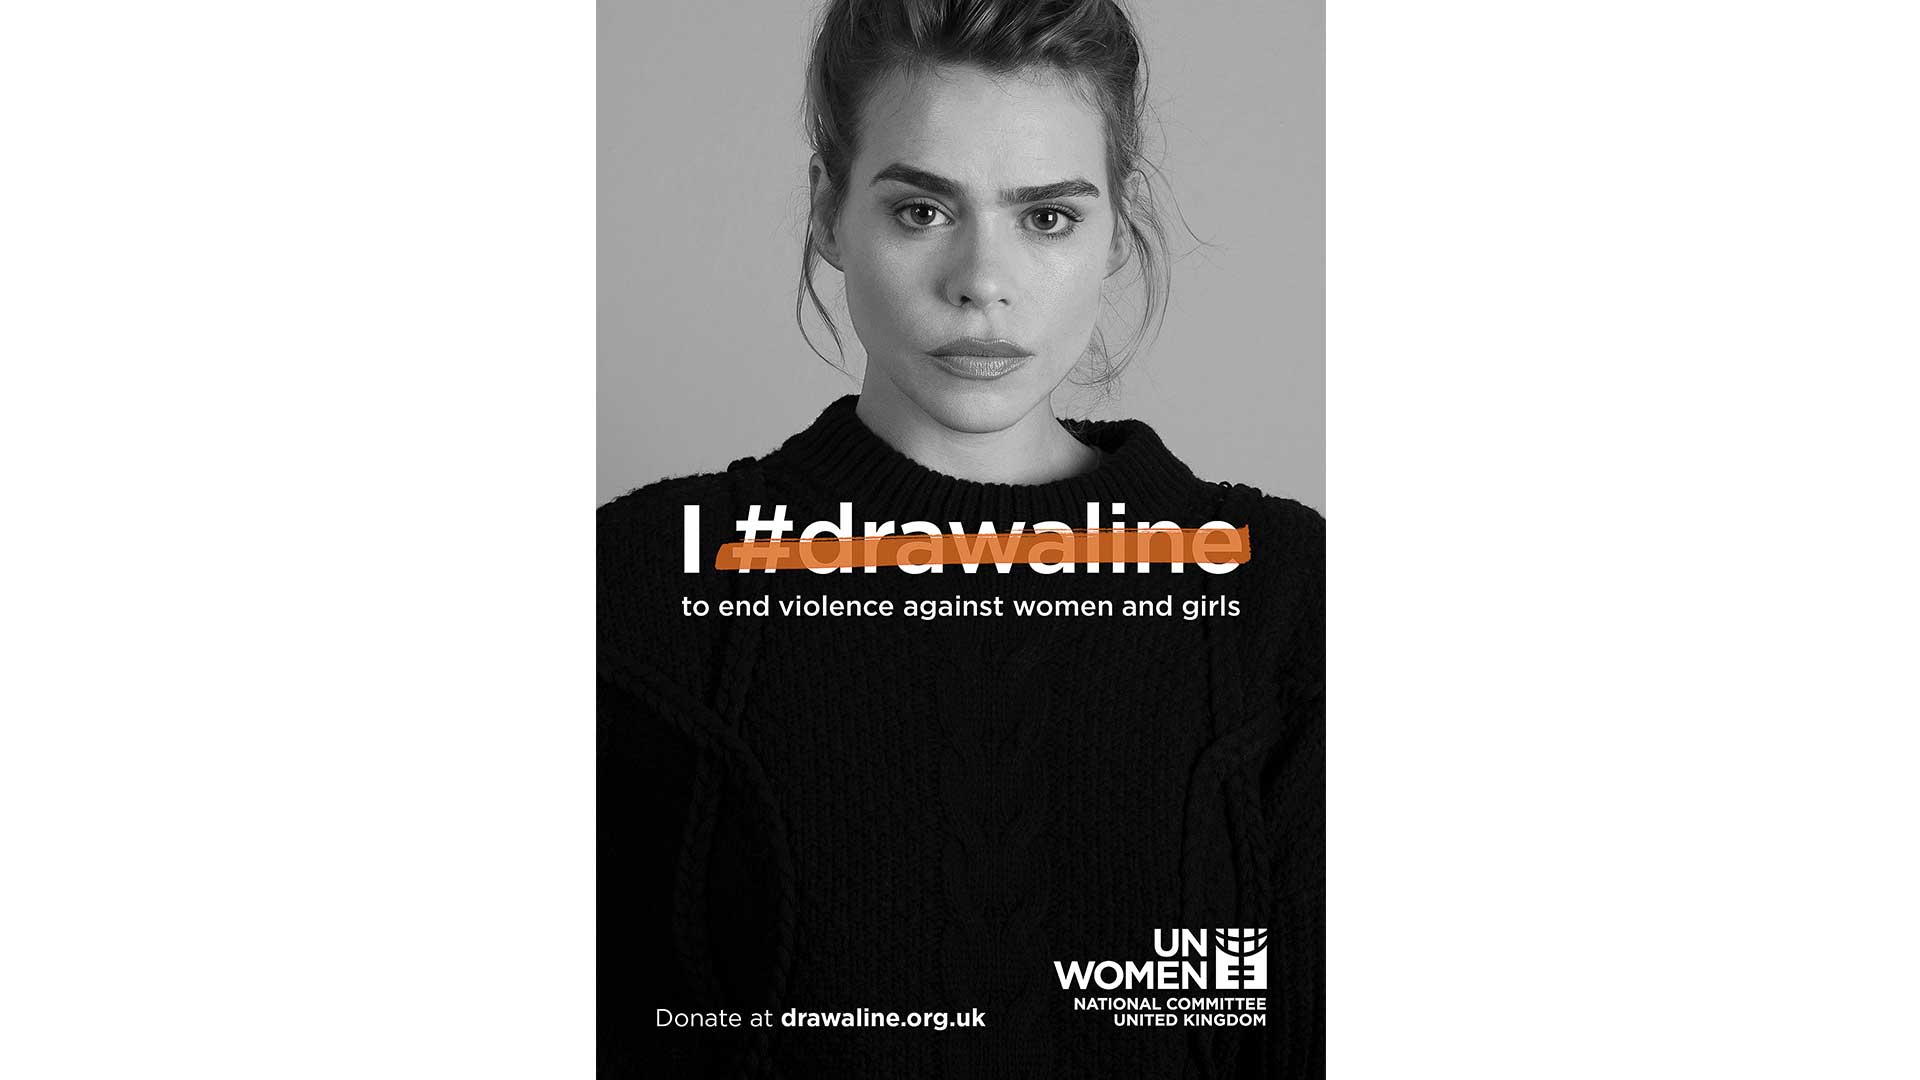 Poster showing Billie Piper looking serious